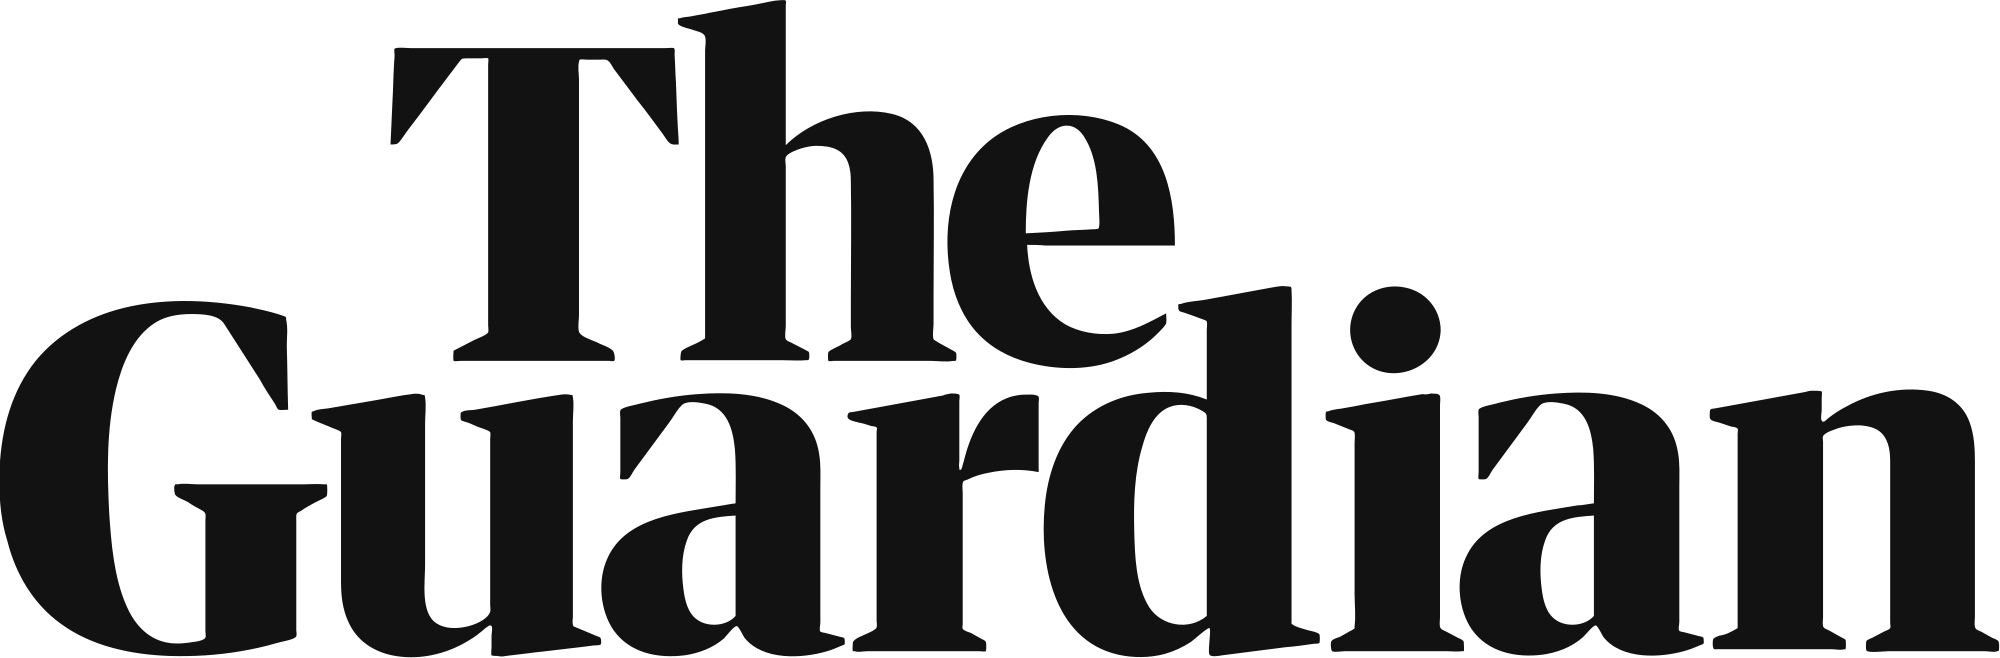 Logo for The Guardian